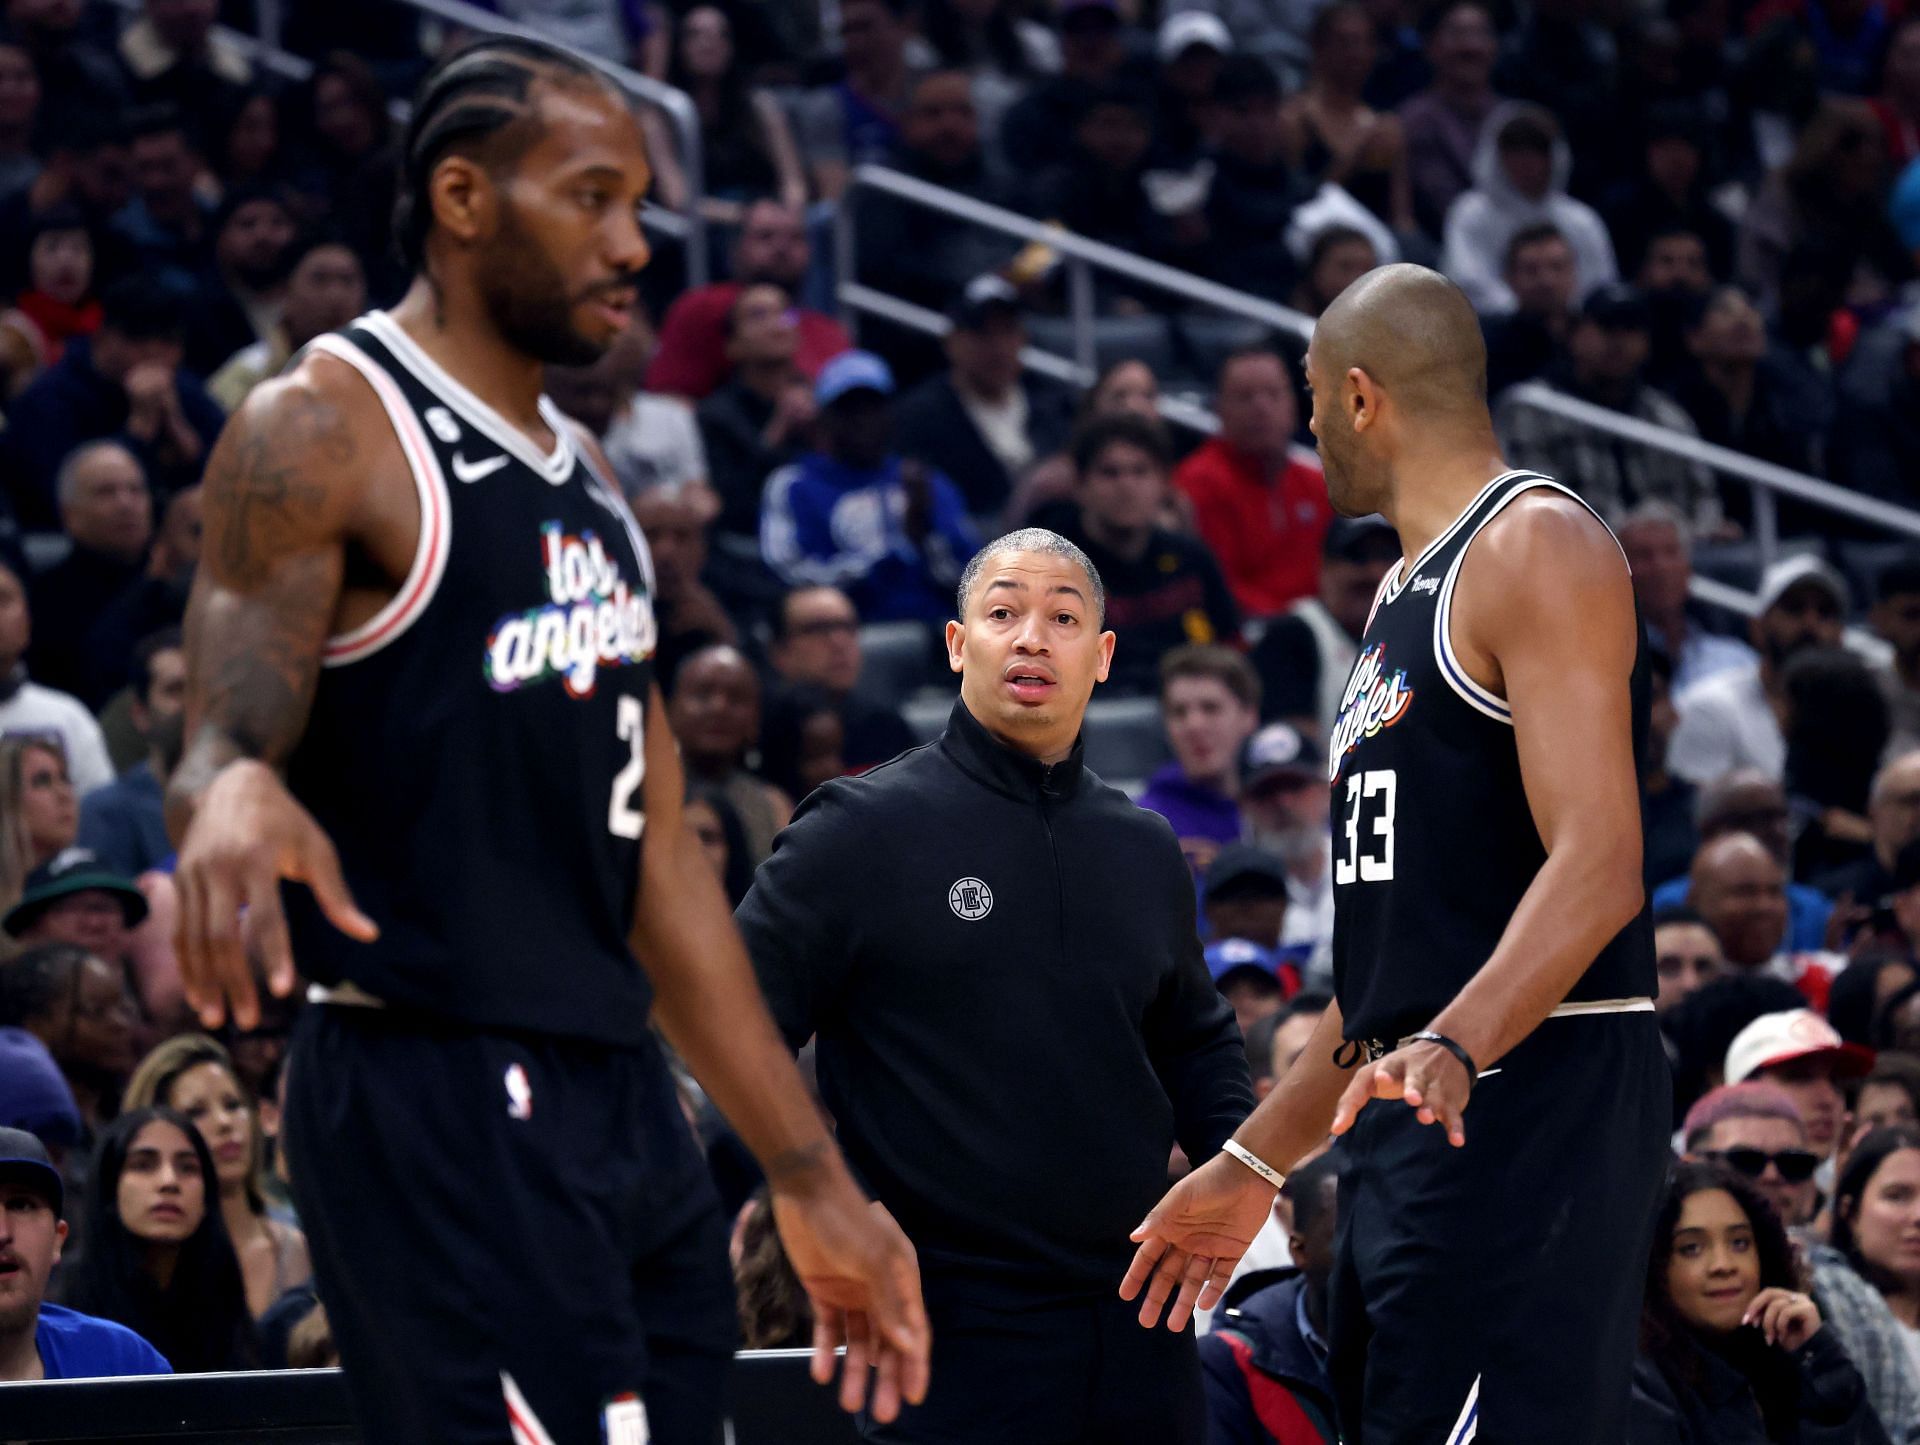 The Clippers will likely extend Tyronn Lue&#039;s contract once it expires. (Image via Getty Images)